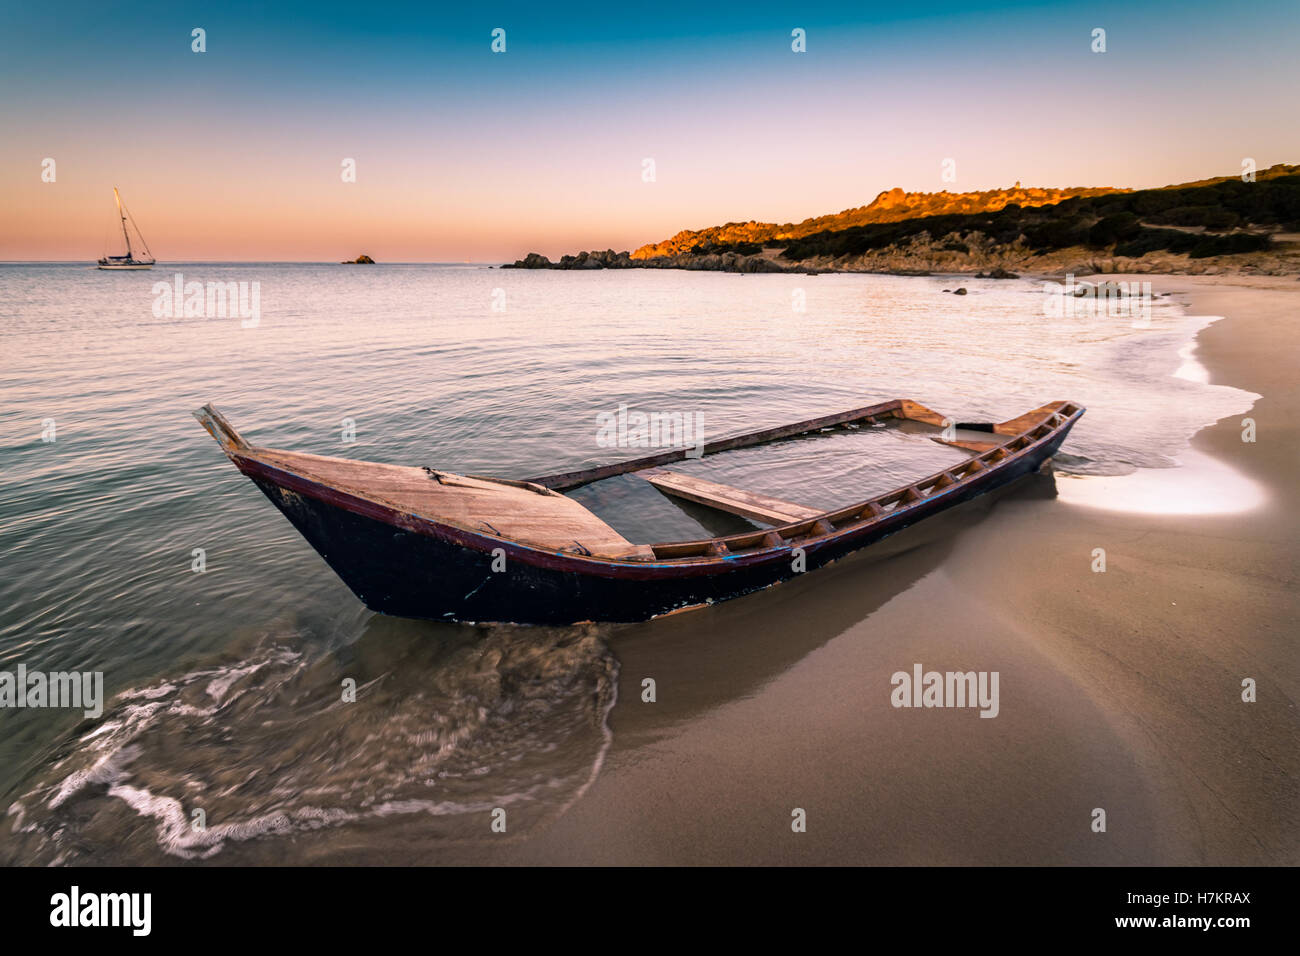 Old wooden boat wrecked on a sandy beach. Stock Photo